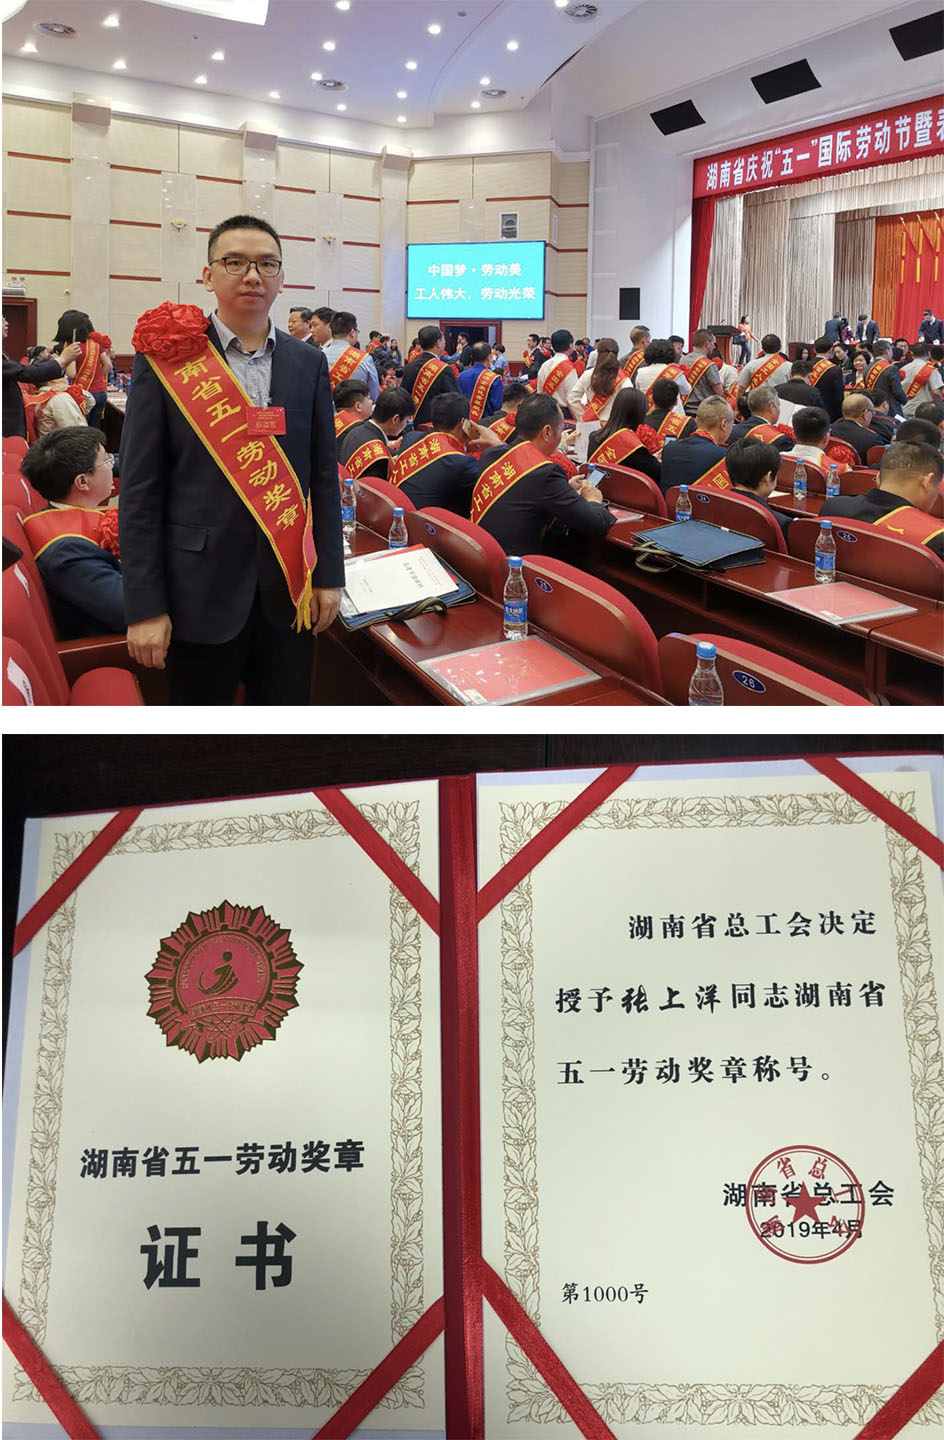 Warm congratulations to Zhang Shangyang for winning the Title of Hunan May 1st Labor Medal